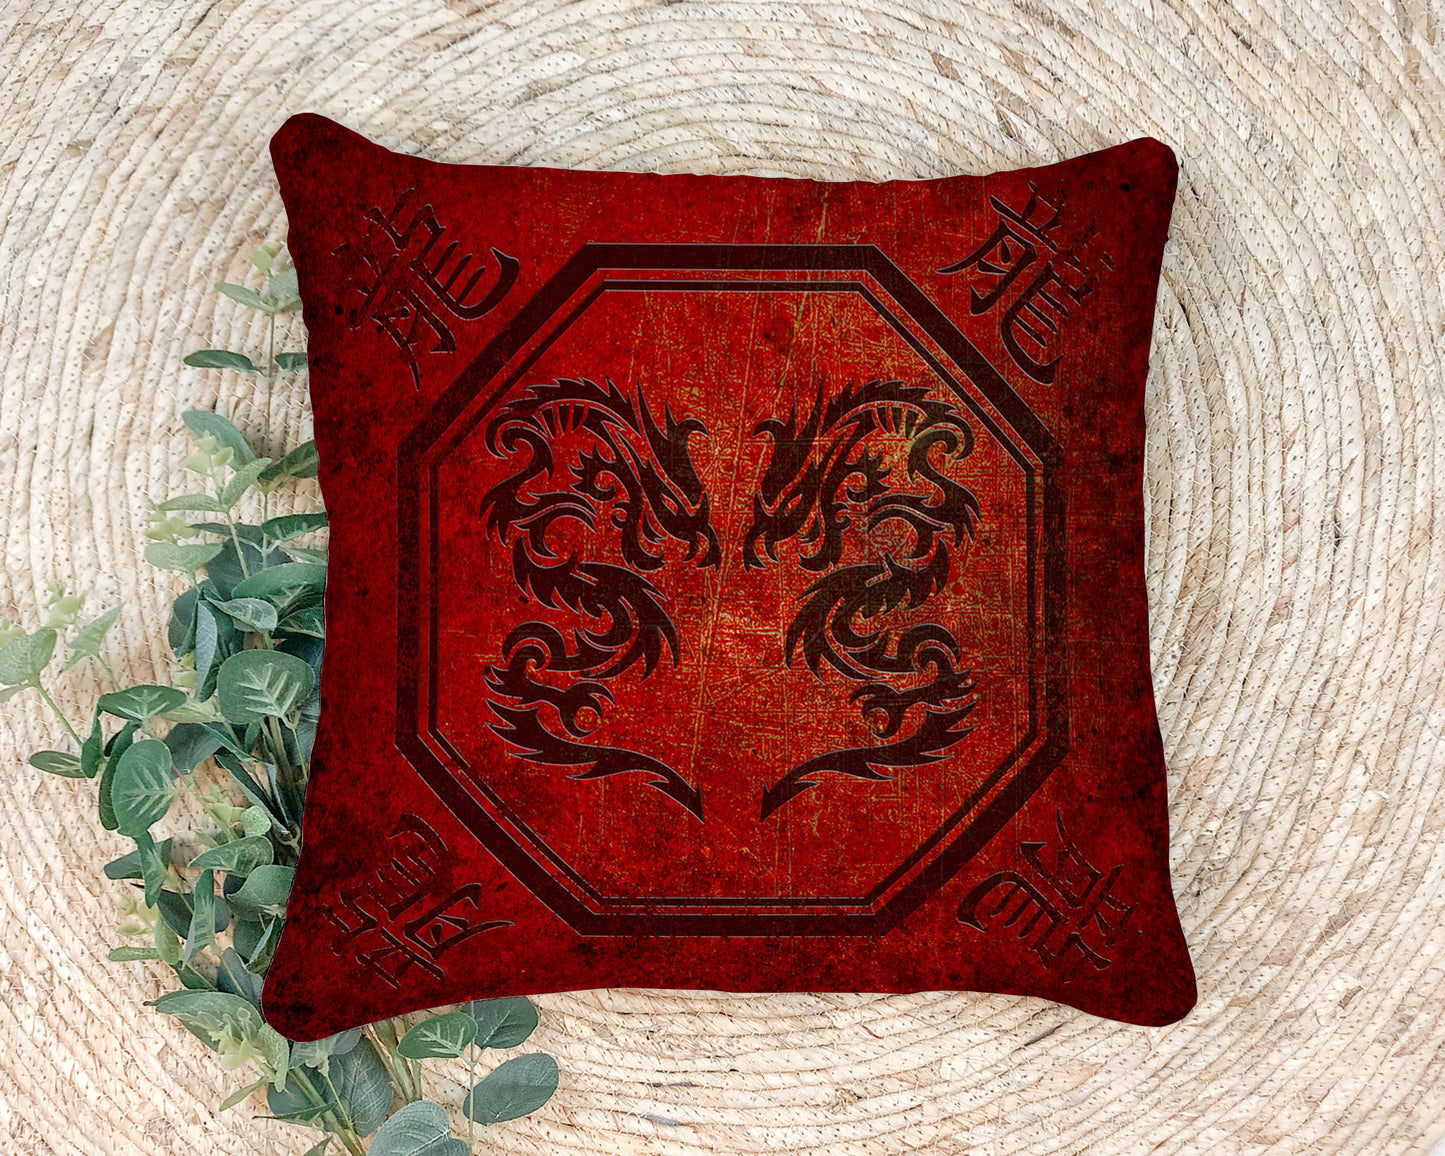 Twin Chinese Dragons on Lava Red Background  Square Pillow on Rug